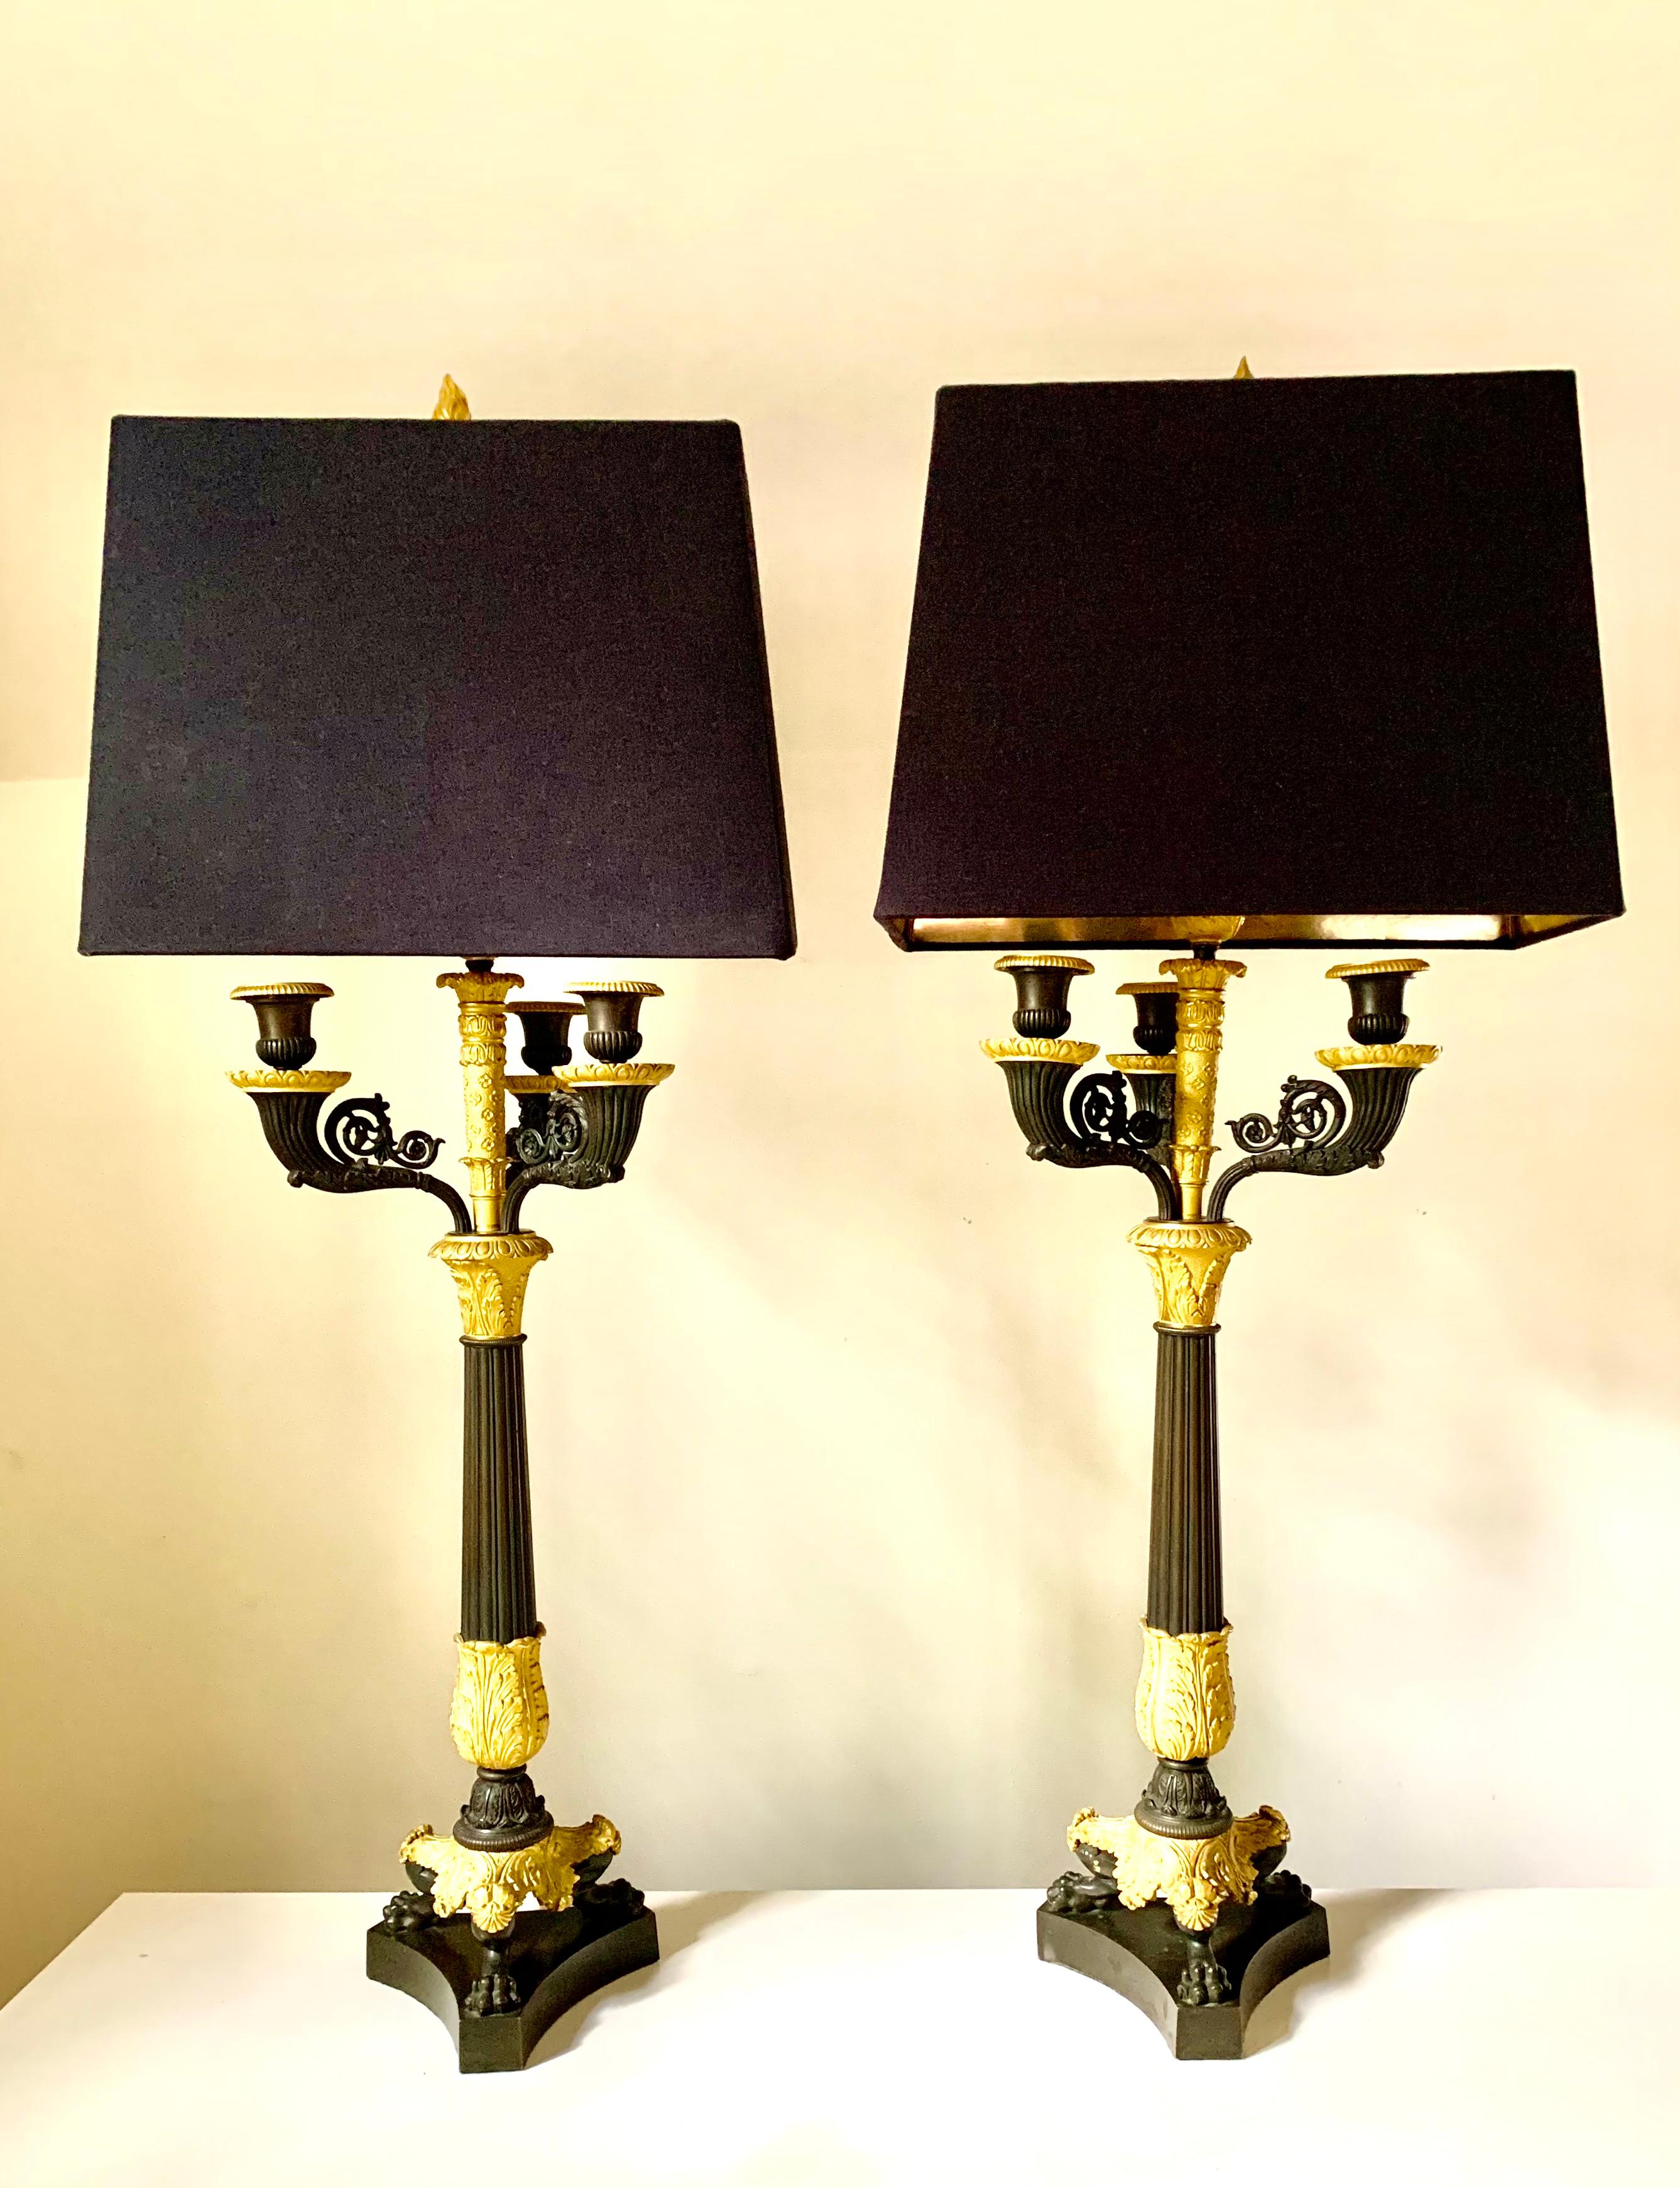 Pair Charles X Empire Period Gilt, Patinated Bronze Candelabra Lamps, circa 1830 For Sale 6